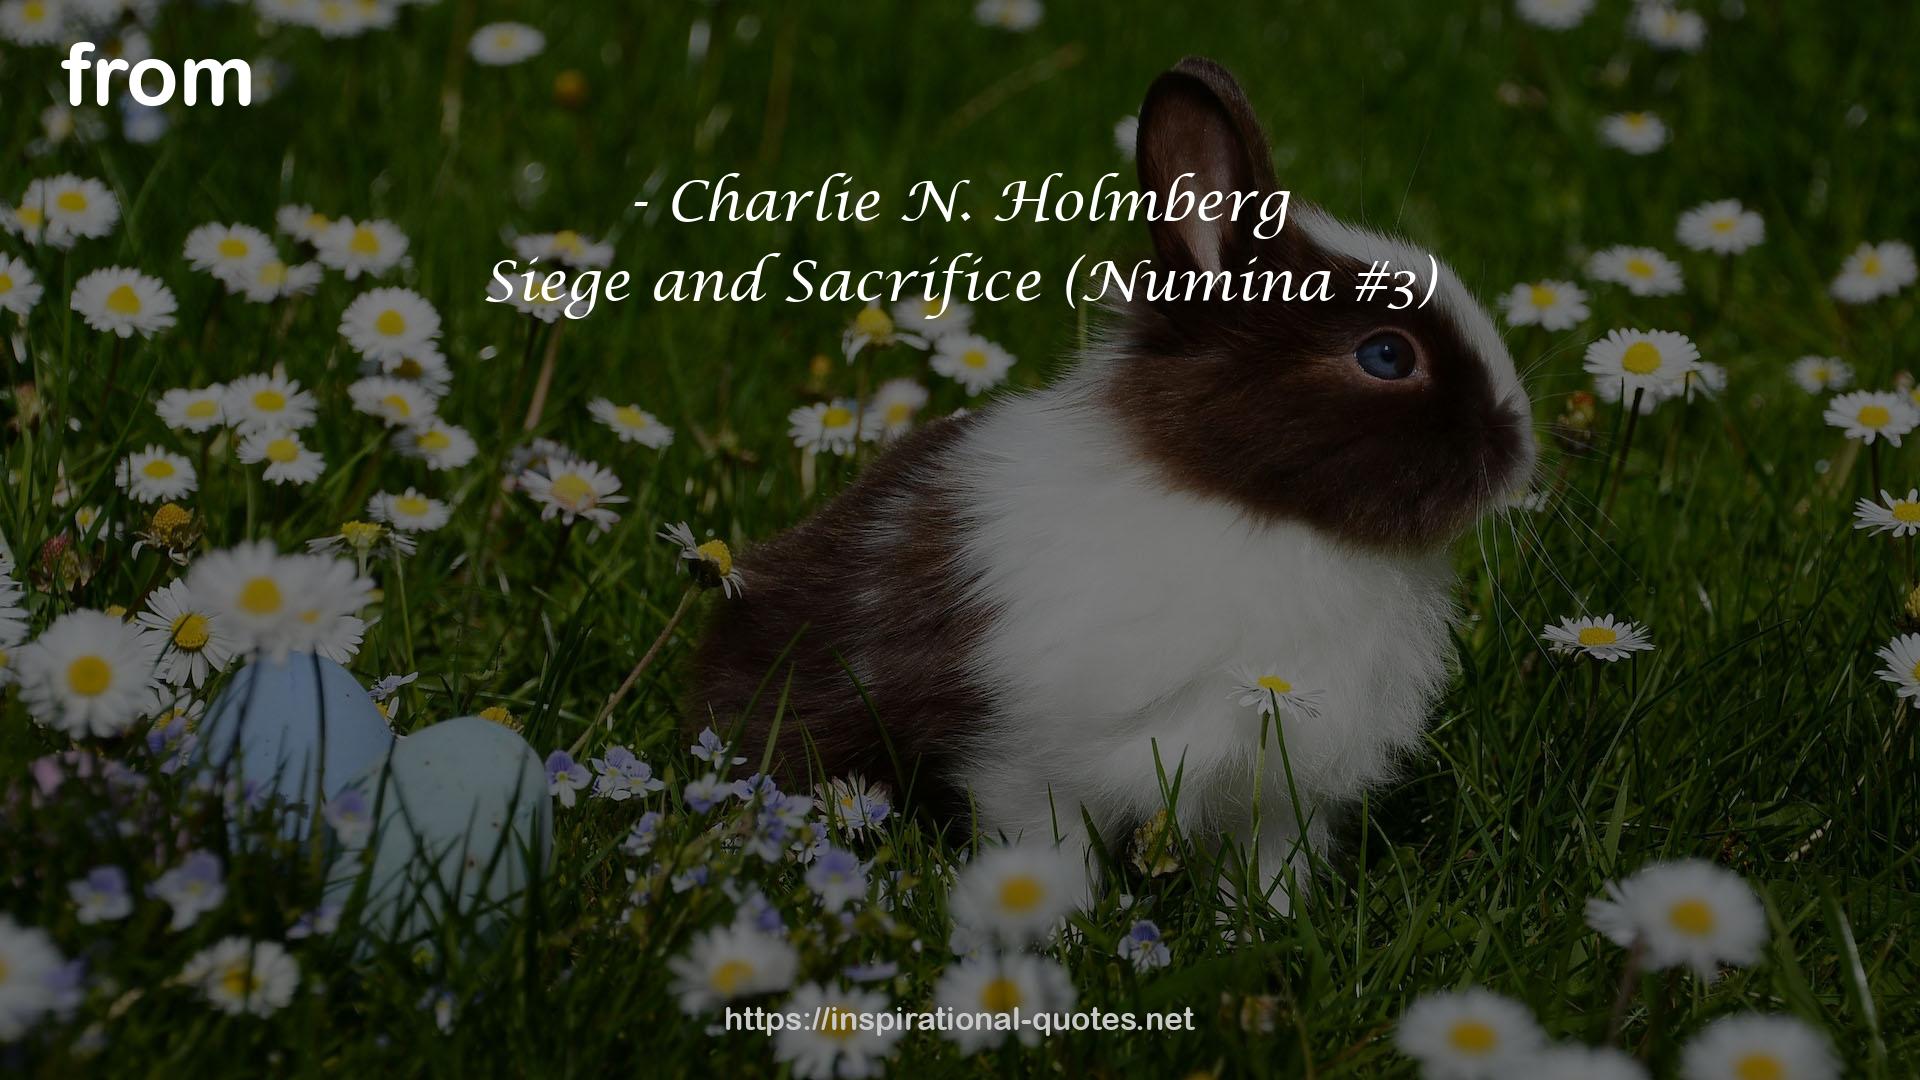 Charlie N. Holmberg QUOTES